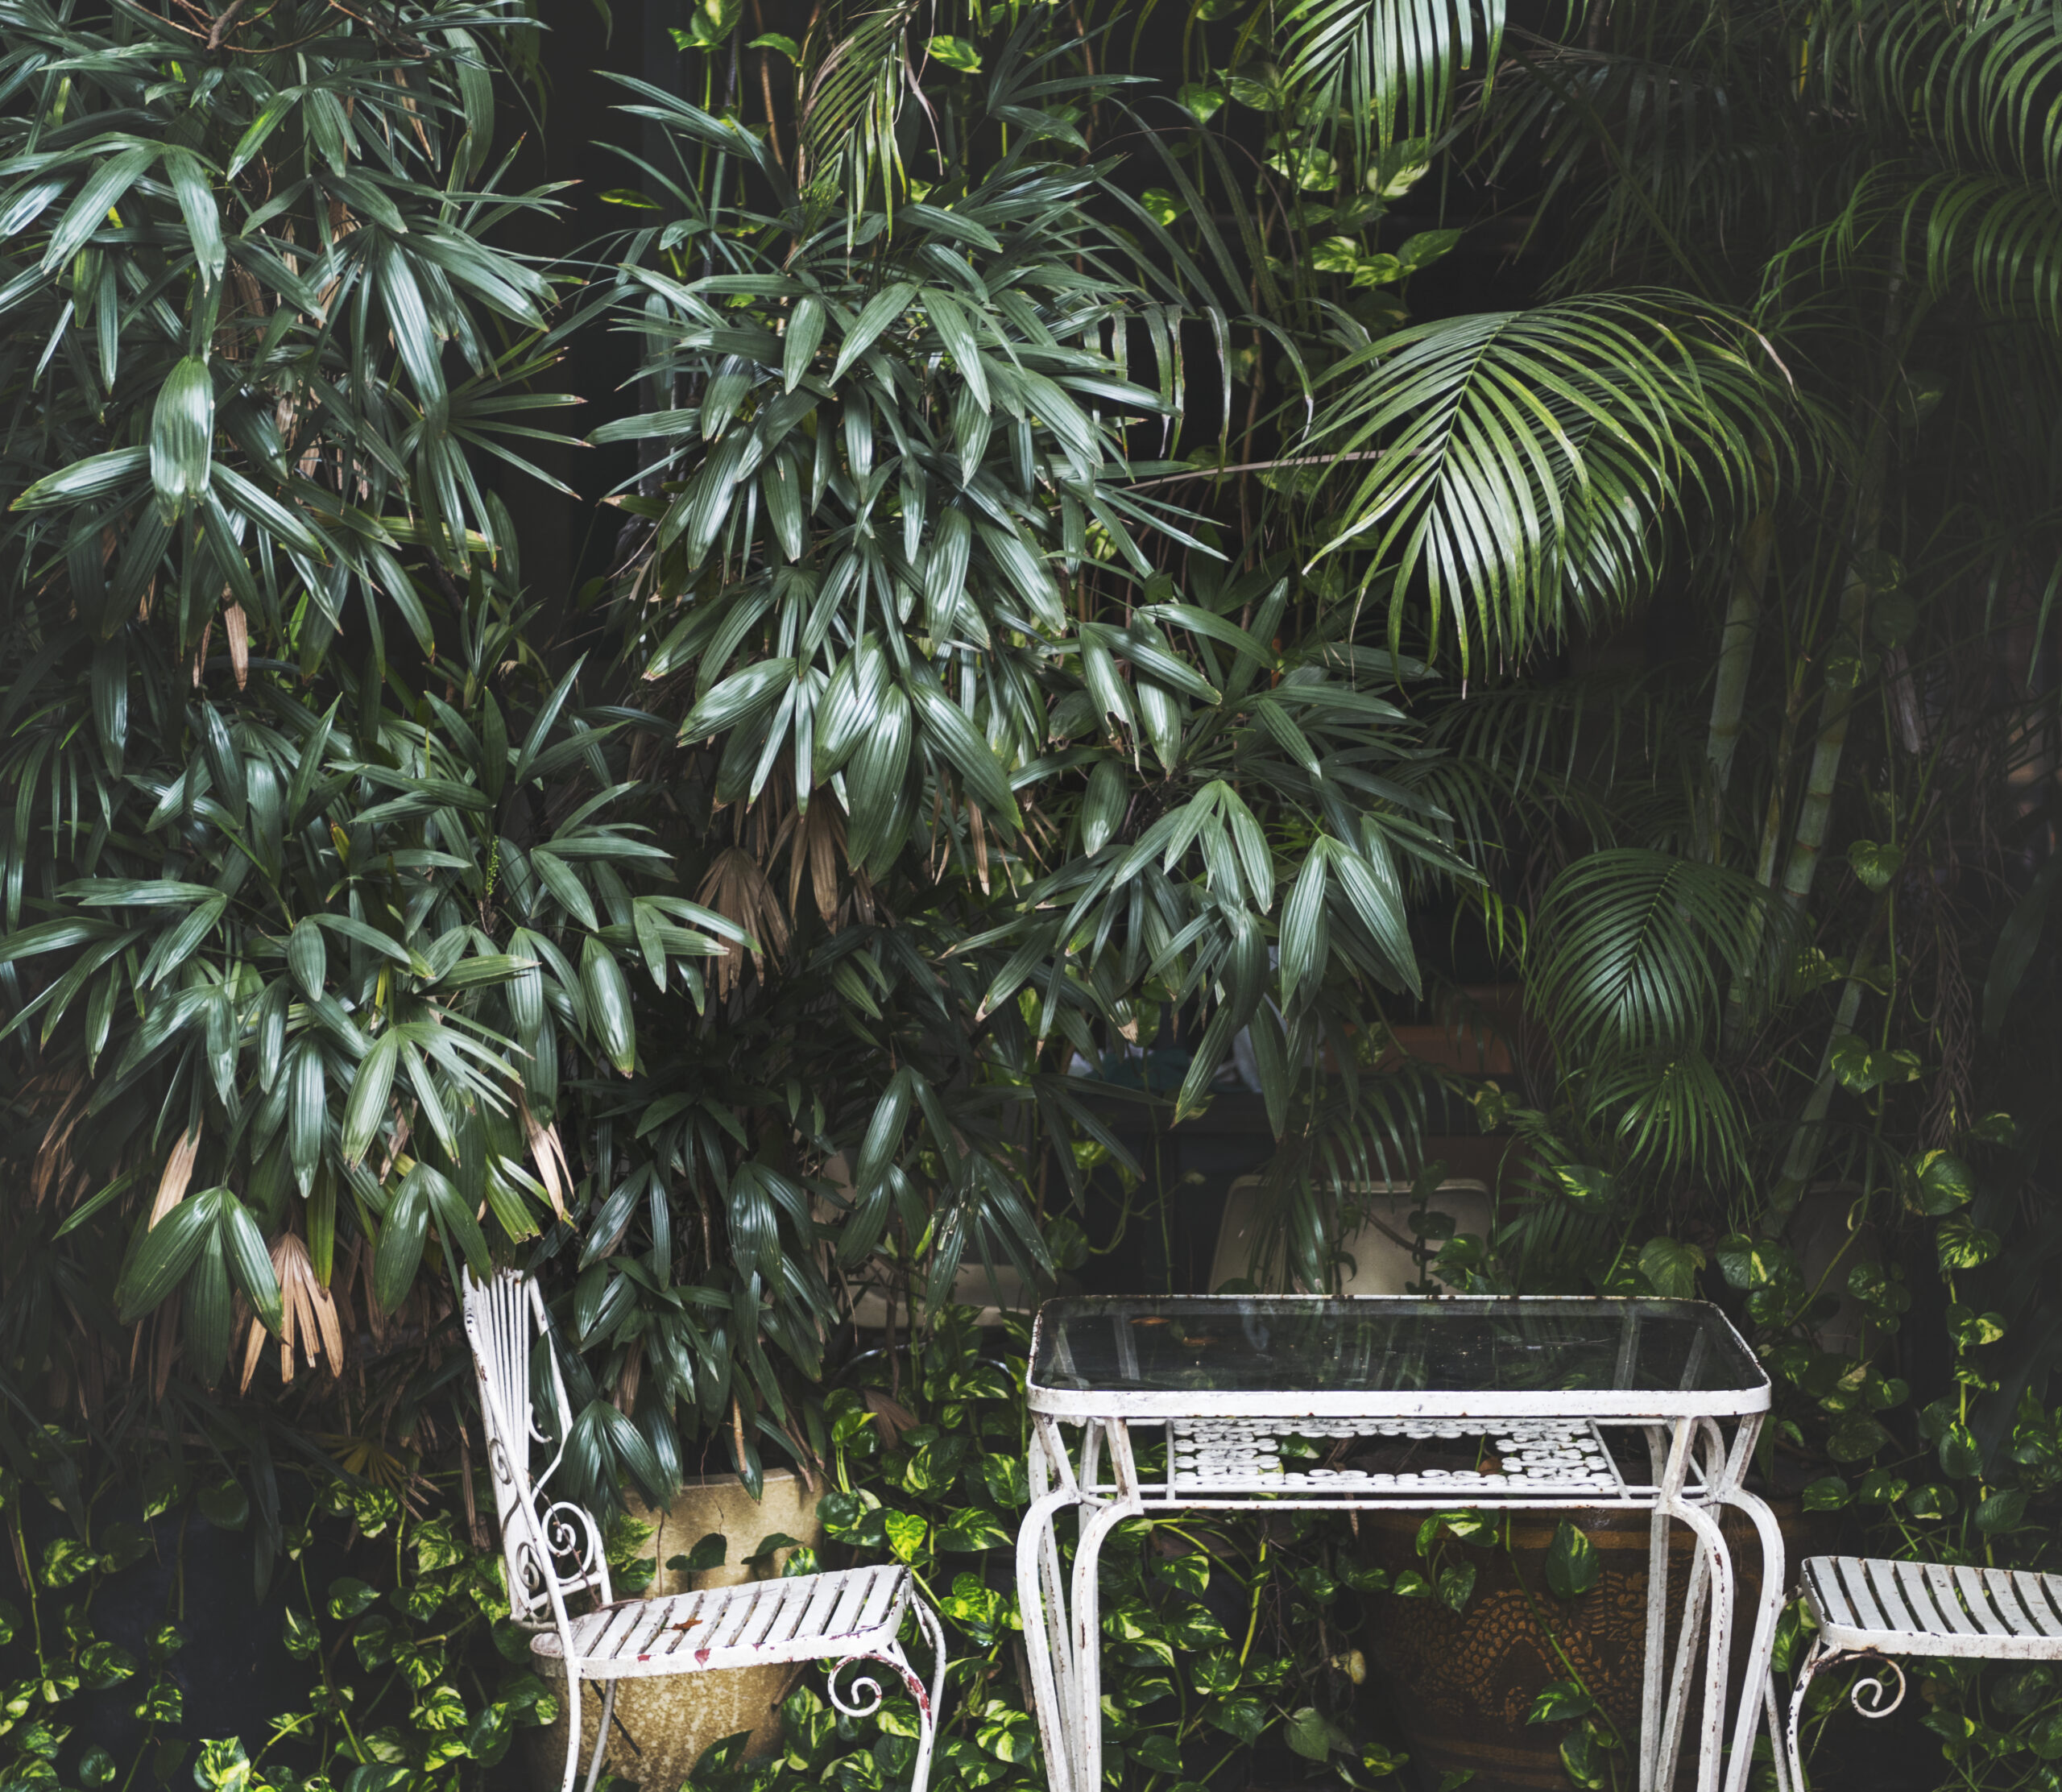 🌼 Elevate your outdoor space with a touch of nature! Turn your balcony into a vibrant garden oasis with these simple yet effective tips. 🌱🏞️ #BalconyGarden #GreenSpace #HomeRevamp #YourPlatform 🌿🌸